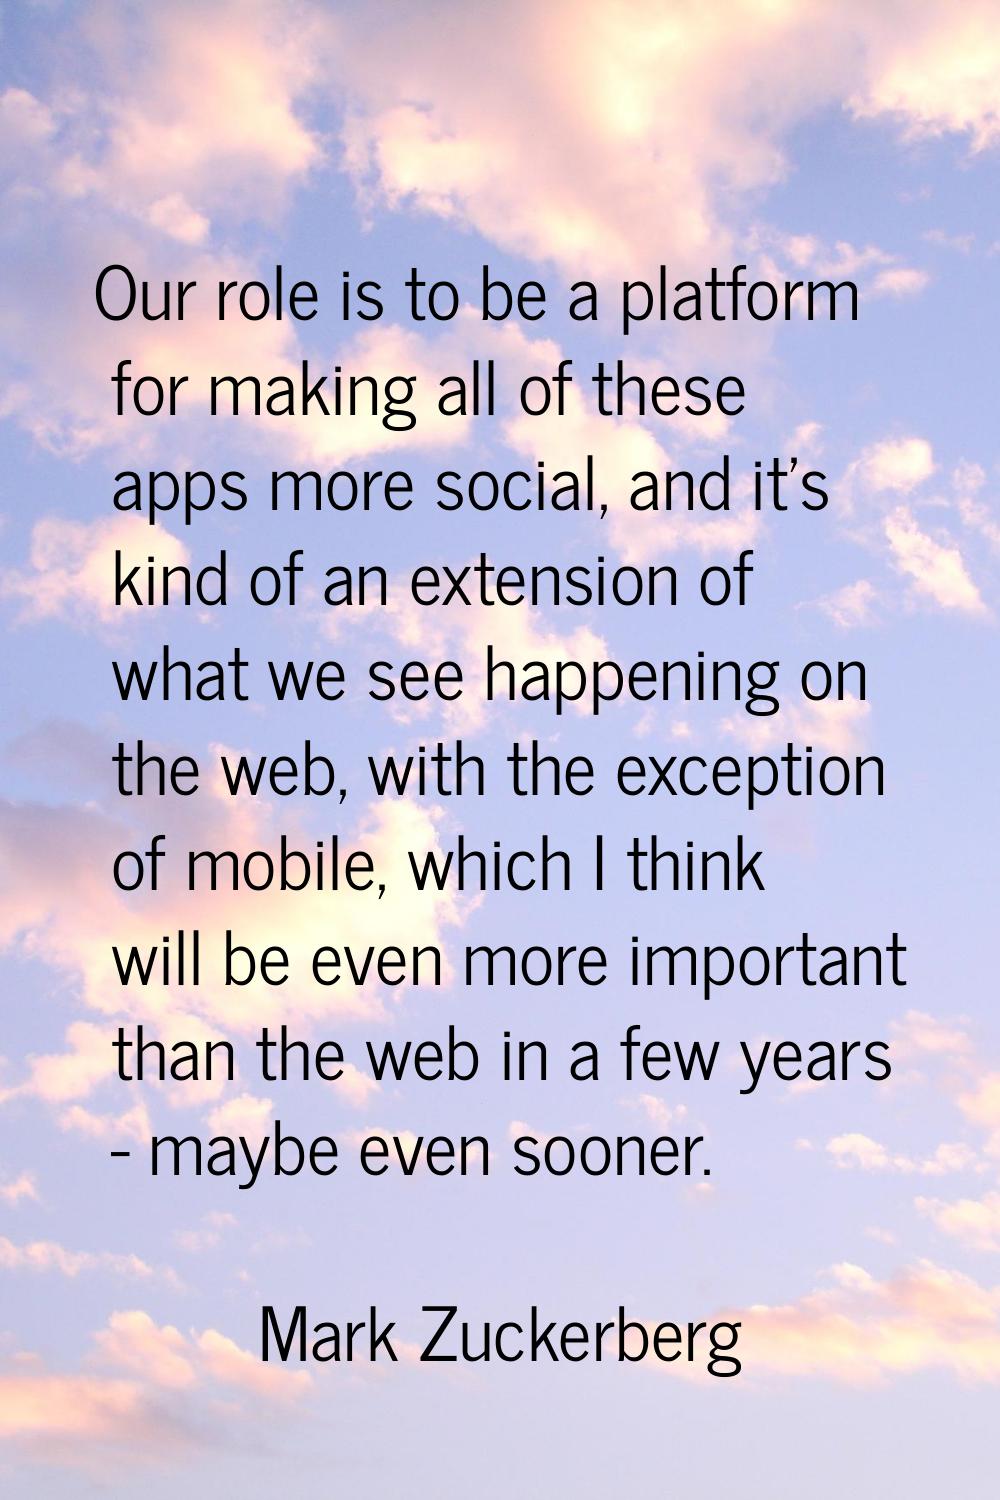 Our role is to be a platform for making all of these apps more social, and it's kind of an extensio